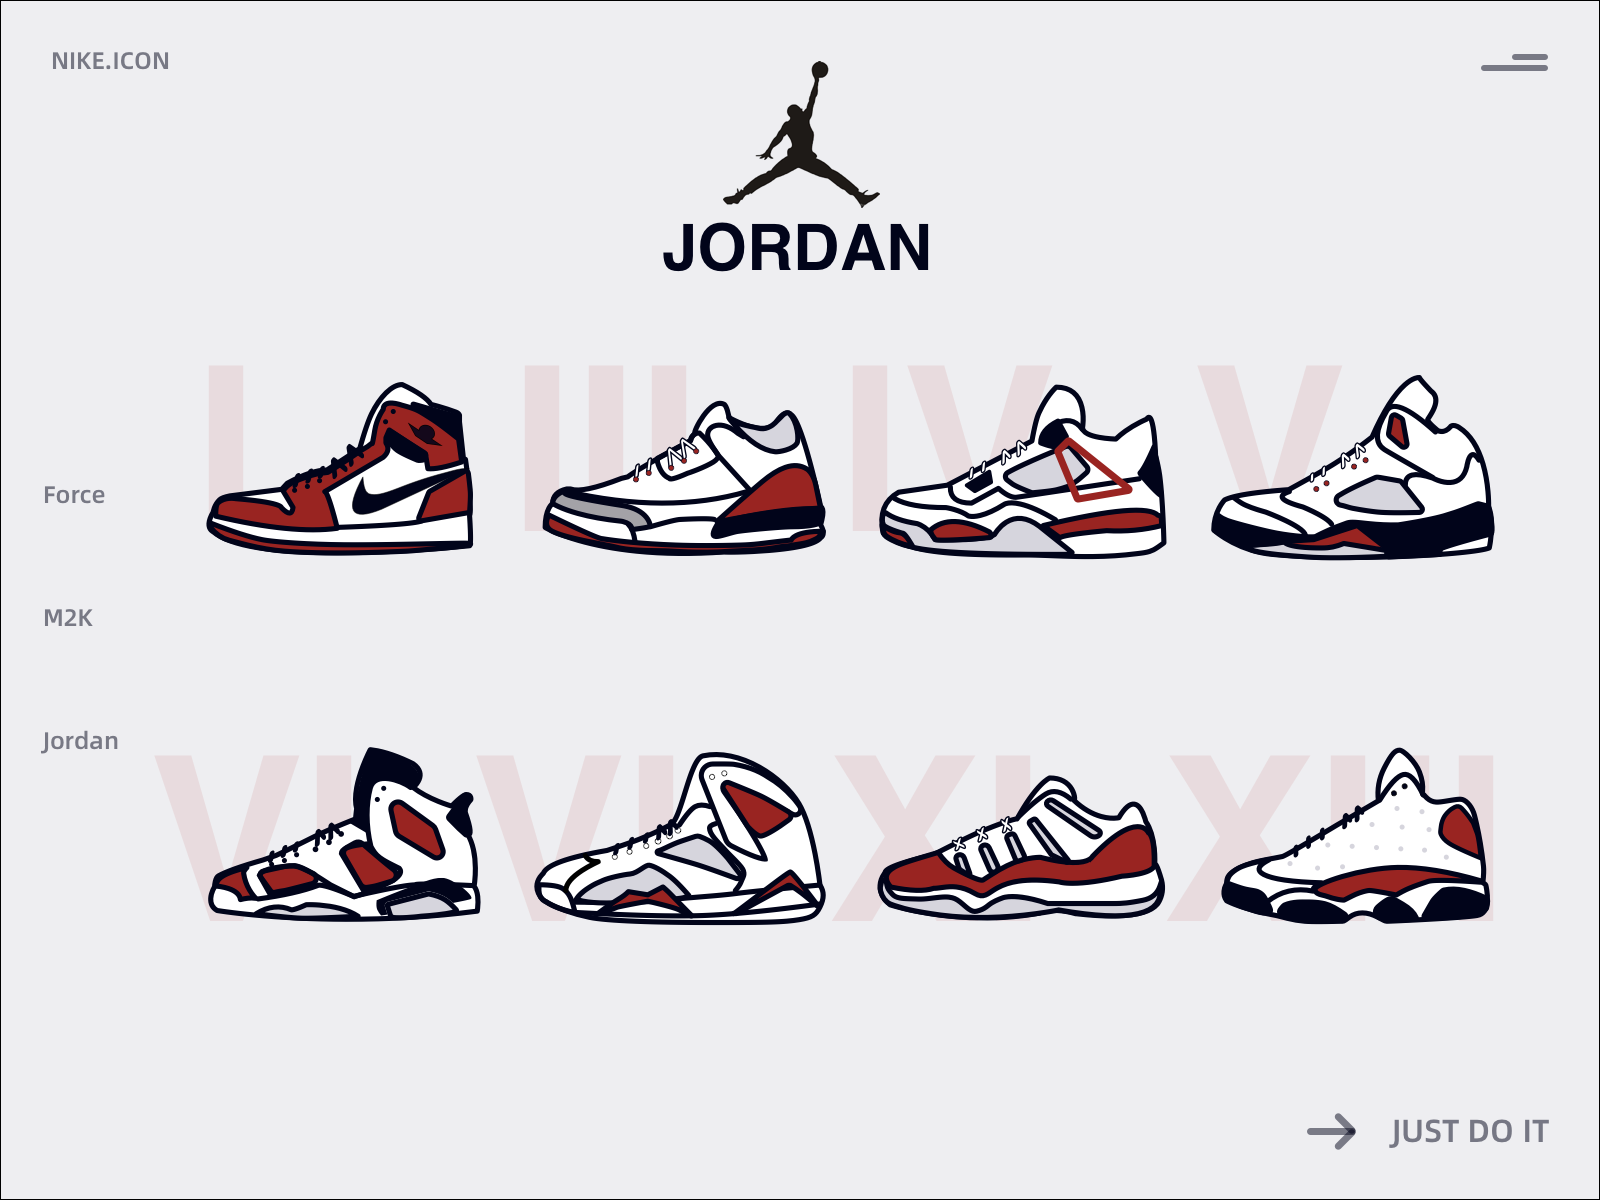 rem Incident, evenement Beraadslagen Nike Shoes icons by 3MiD on Dribbble